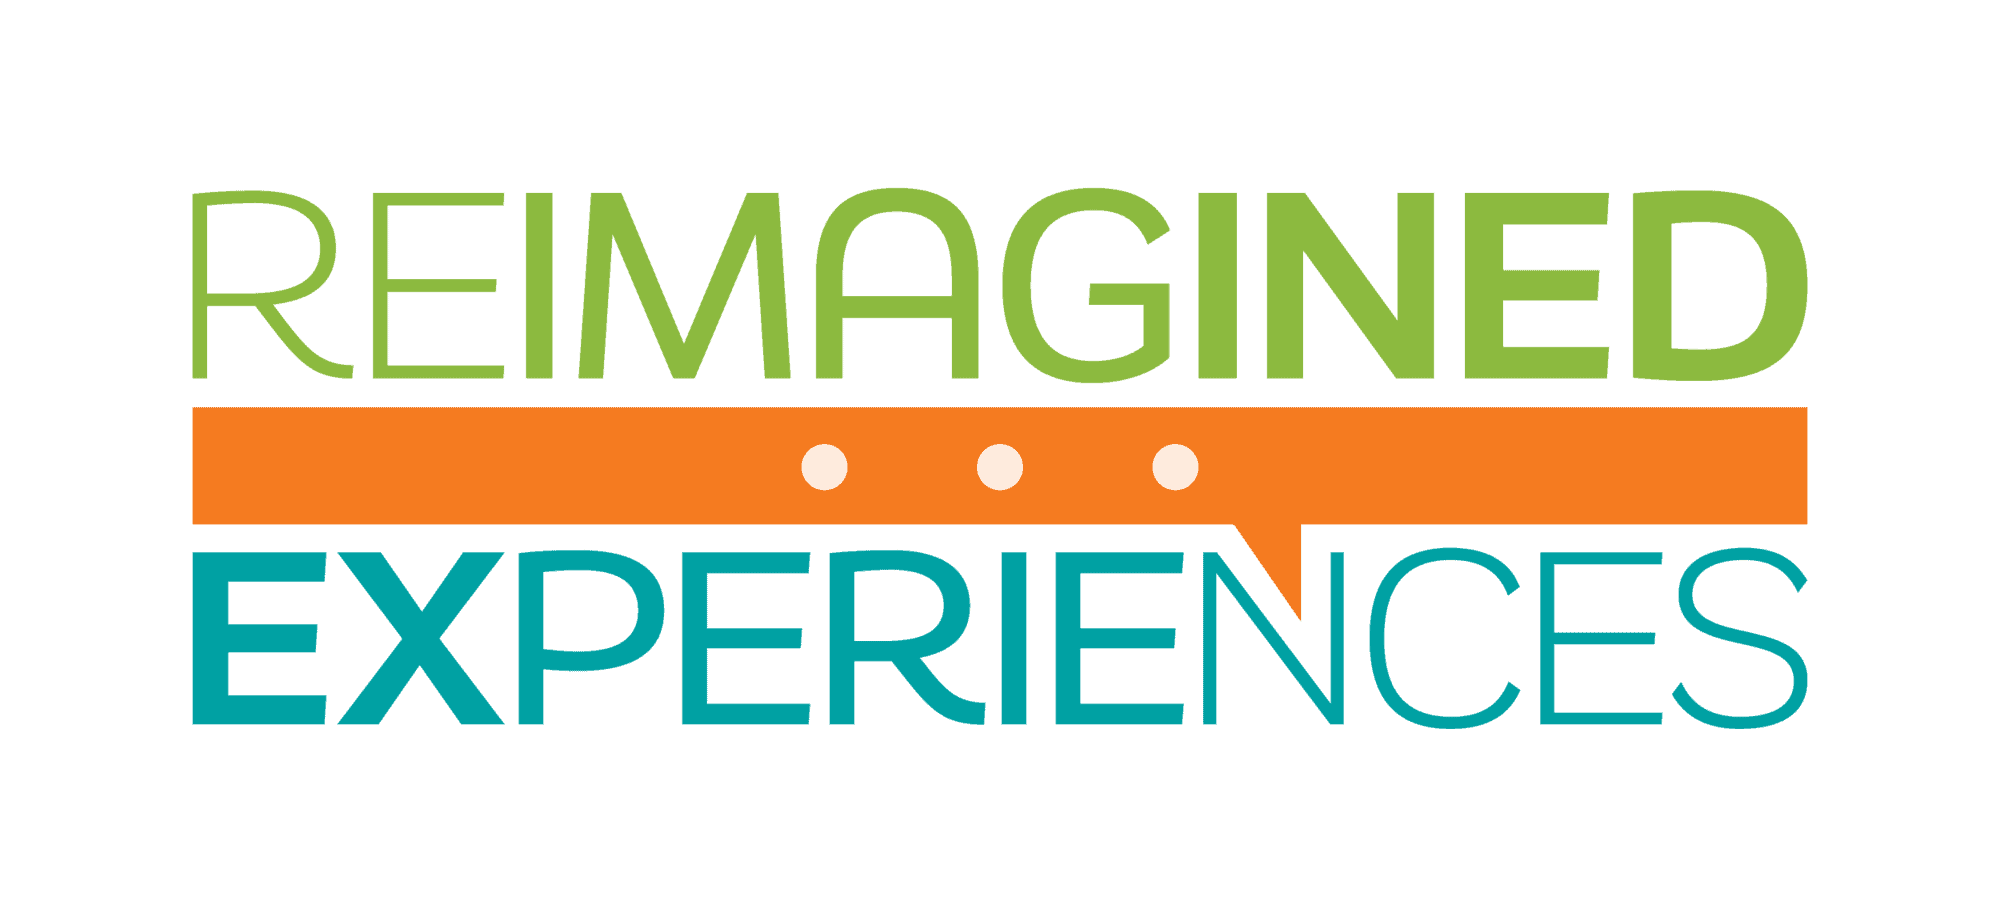 Reimagined Experiences logo, green, orange and blue